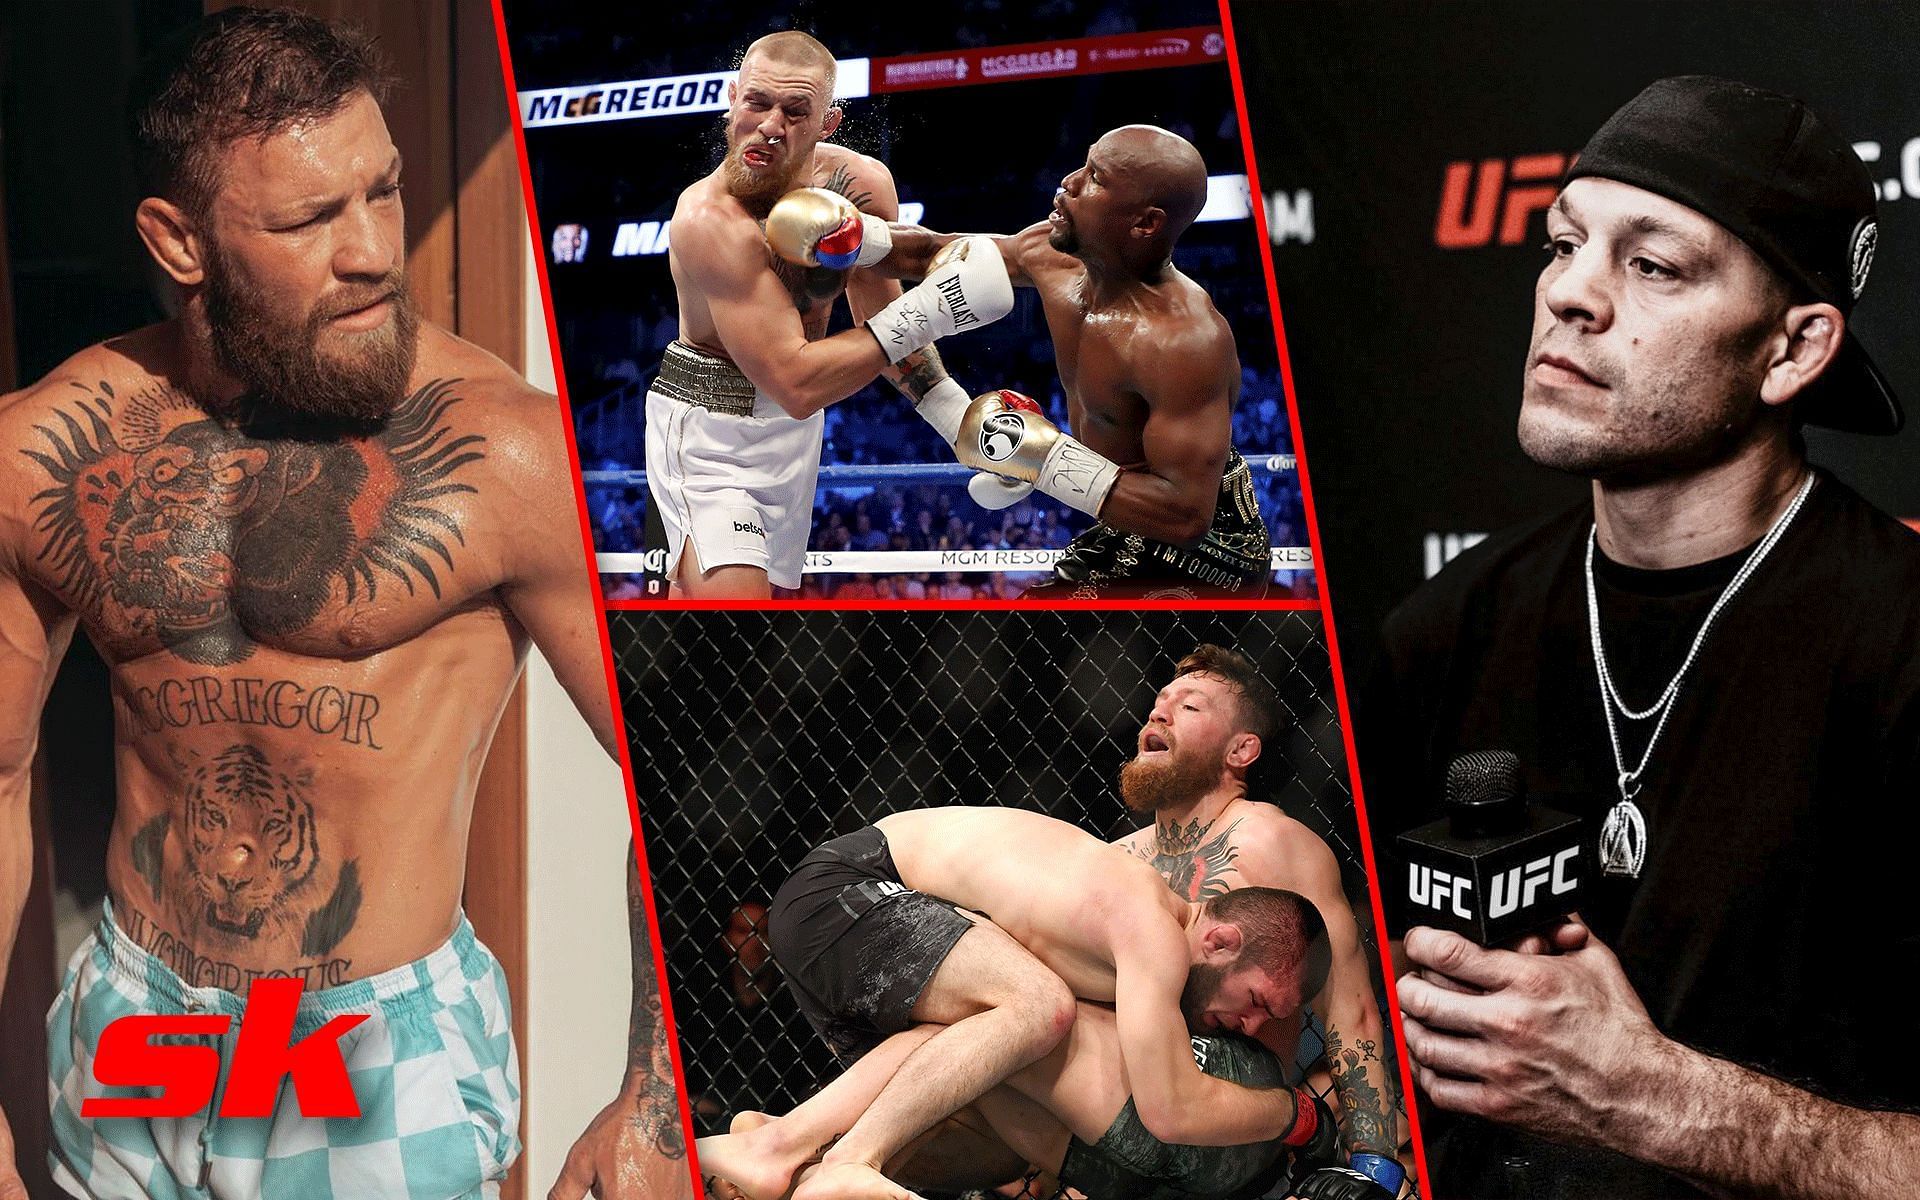 Nate Diaz reminds Conor McGregor of his UFC 196 loss [Images via: @natediaz209 and @thenotoriousmma on Instagram]